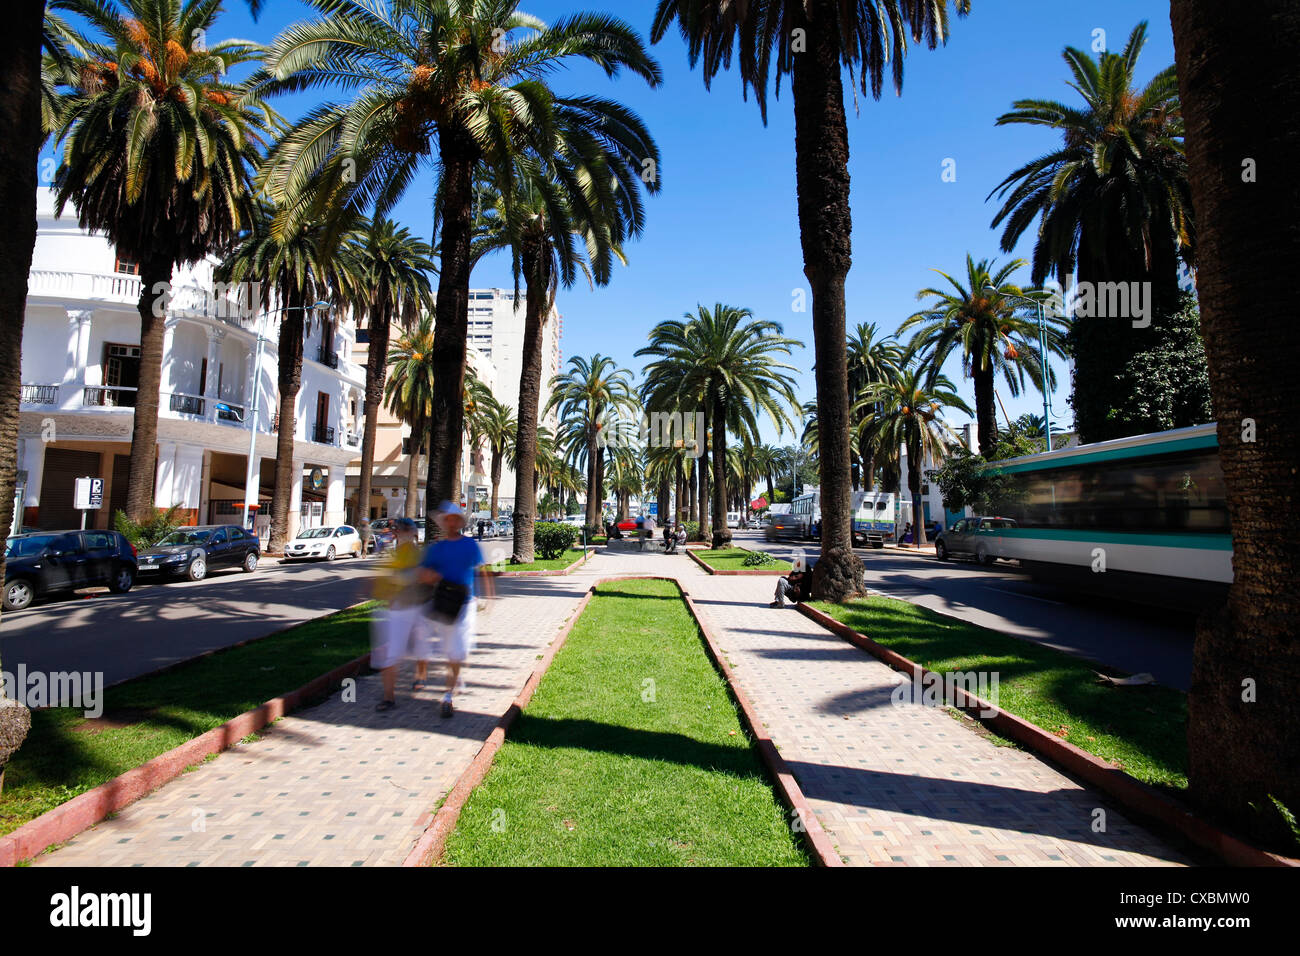 The Boulevard de Rachidi, a typical wide tree lined street in the smart Lusitania district, Casablanca, Morocco, North Africa Stock Photo